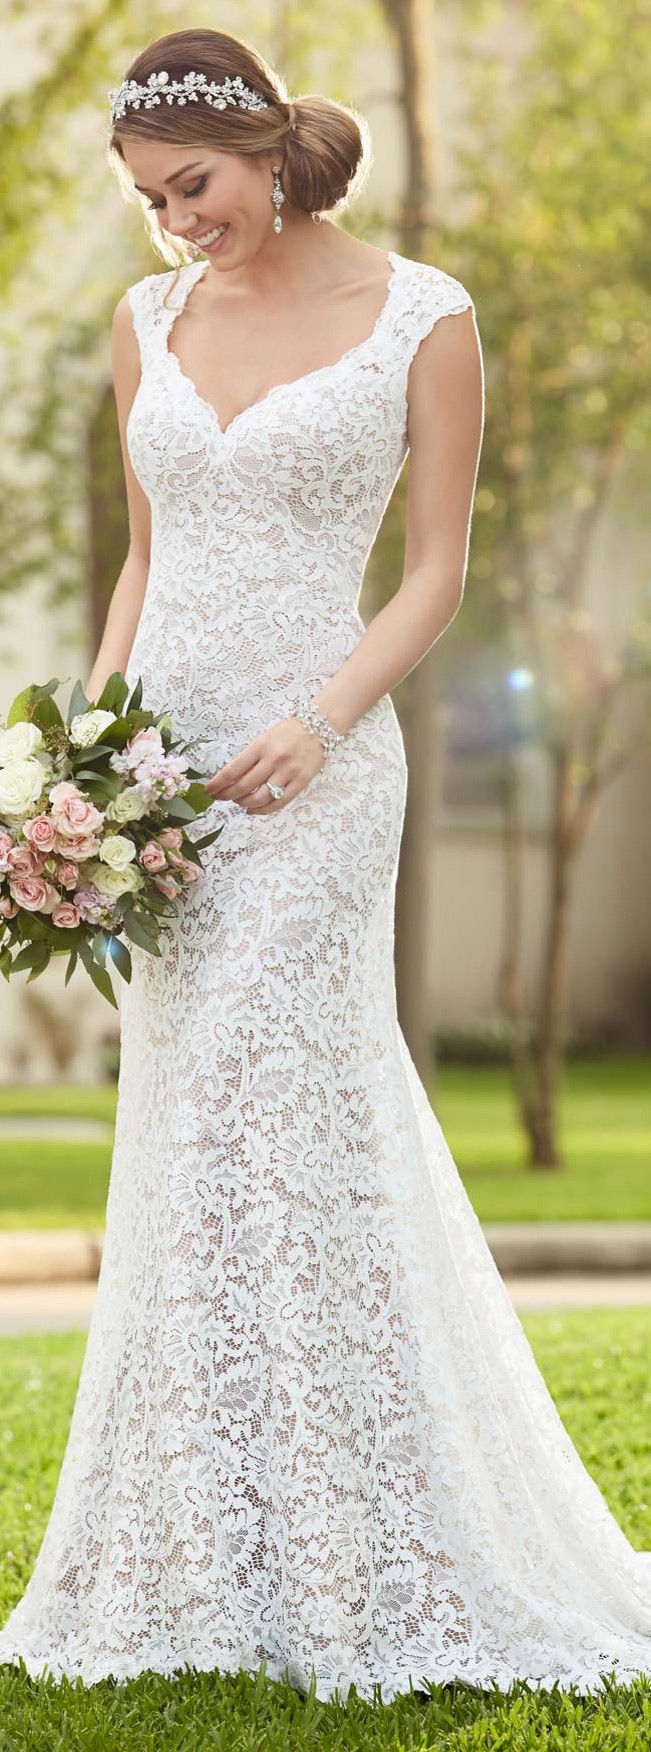 33 Beautiful Lace Wedding Dresses You Will Love - Mrs to Be